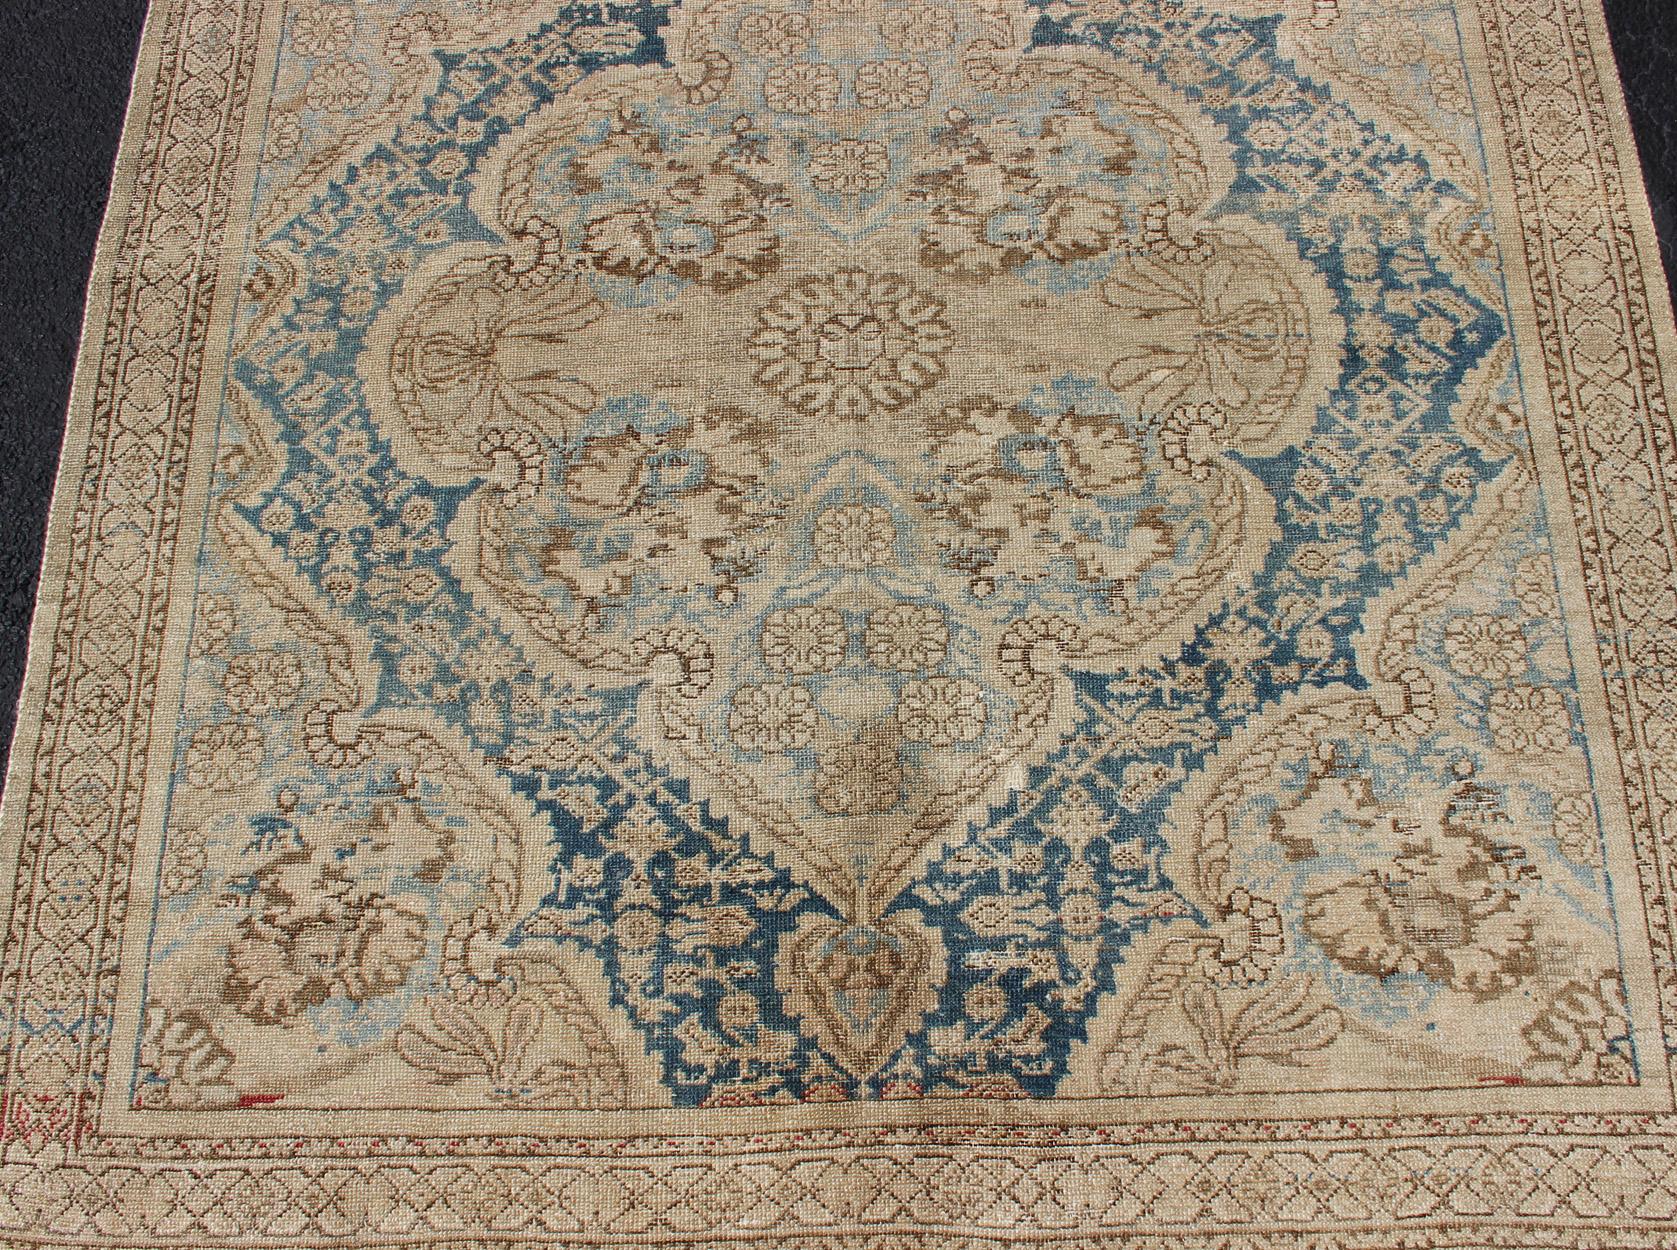 Early 20th Century Blue and Brown Antique Persian Malayer Short Gallery Rug with Floral Medallions